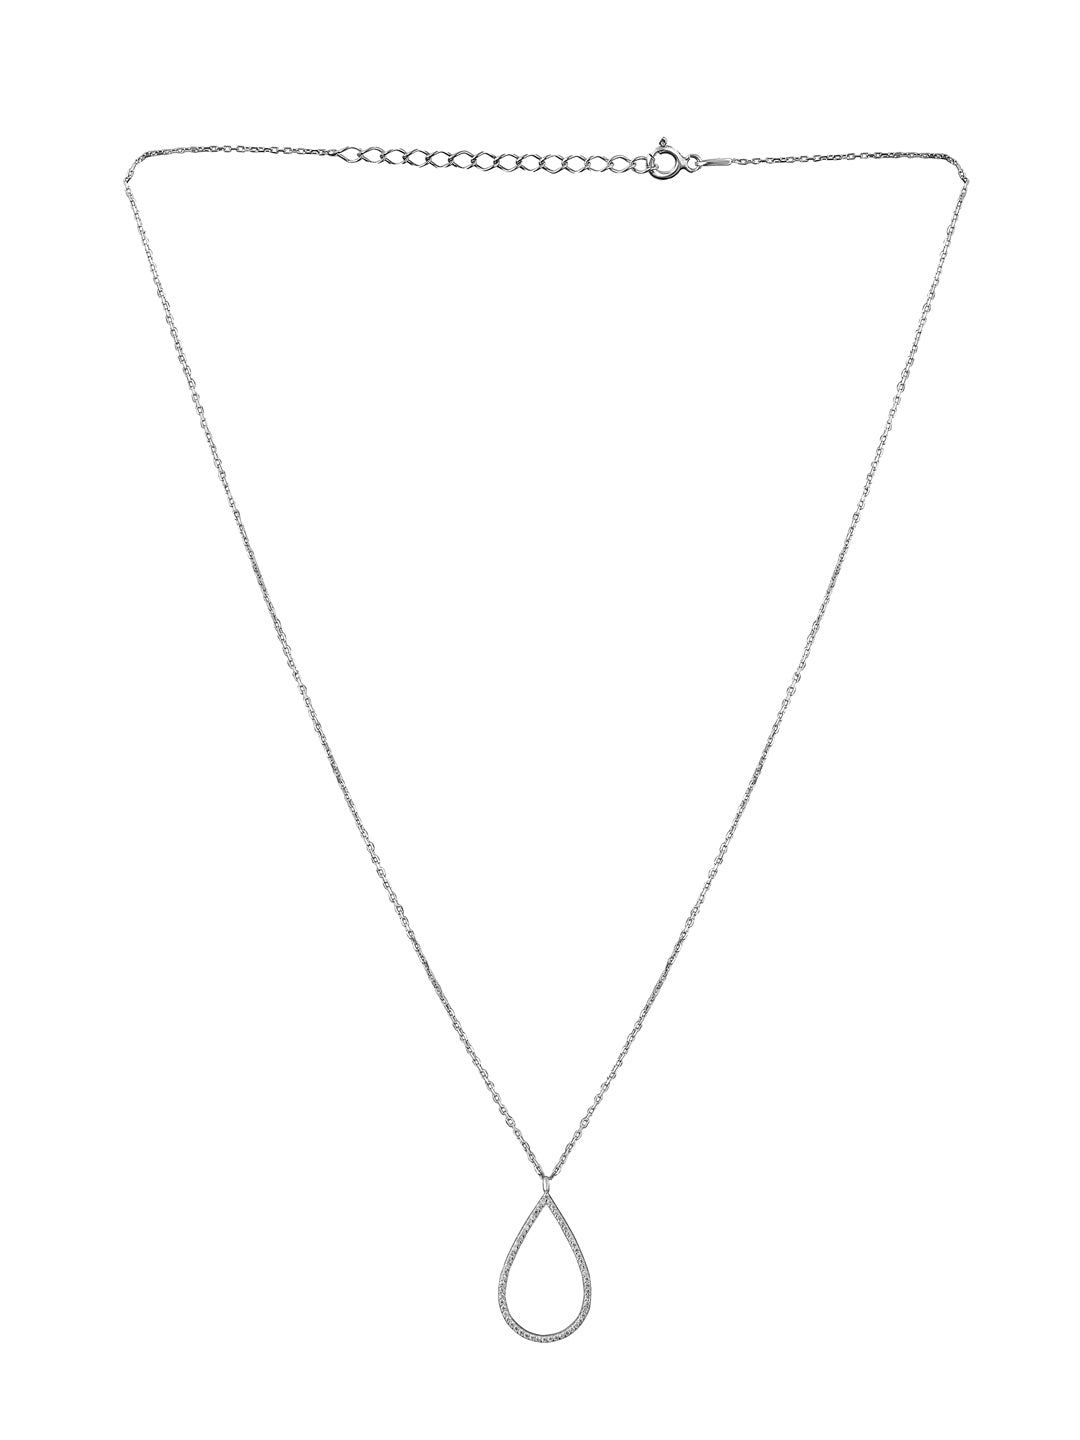 Pure Silver Hollow Drop Necklace Embellished With Cubic Zirconia Stones 